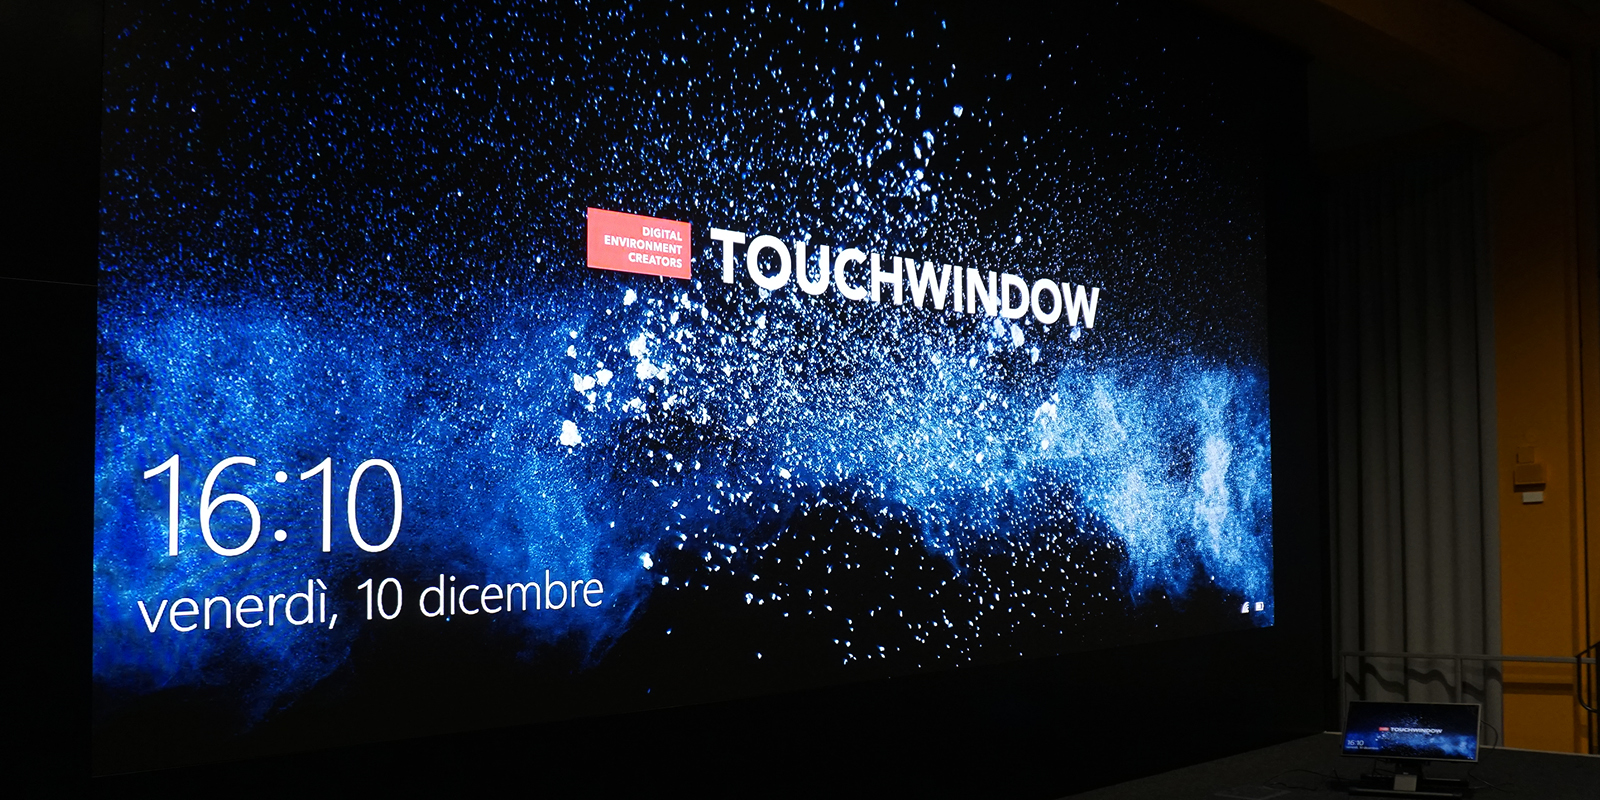 Touchwindow - A historic building becames an Auditorium